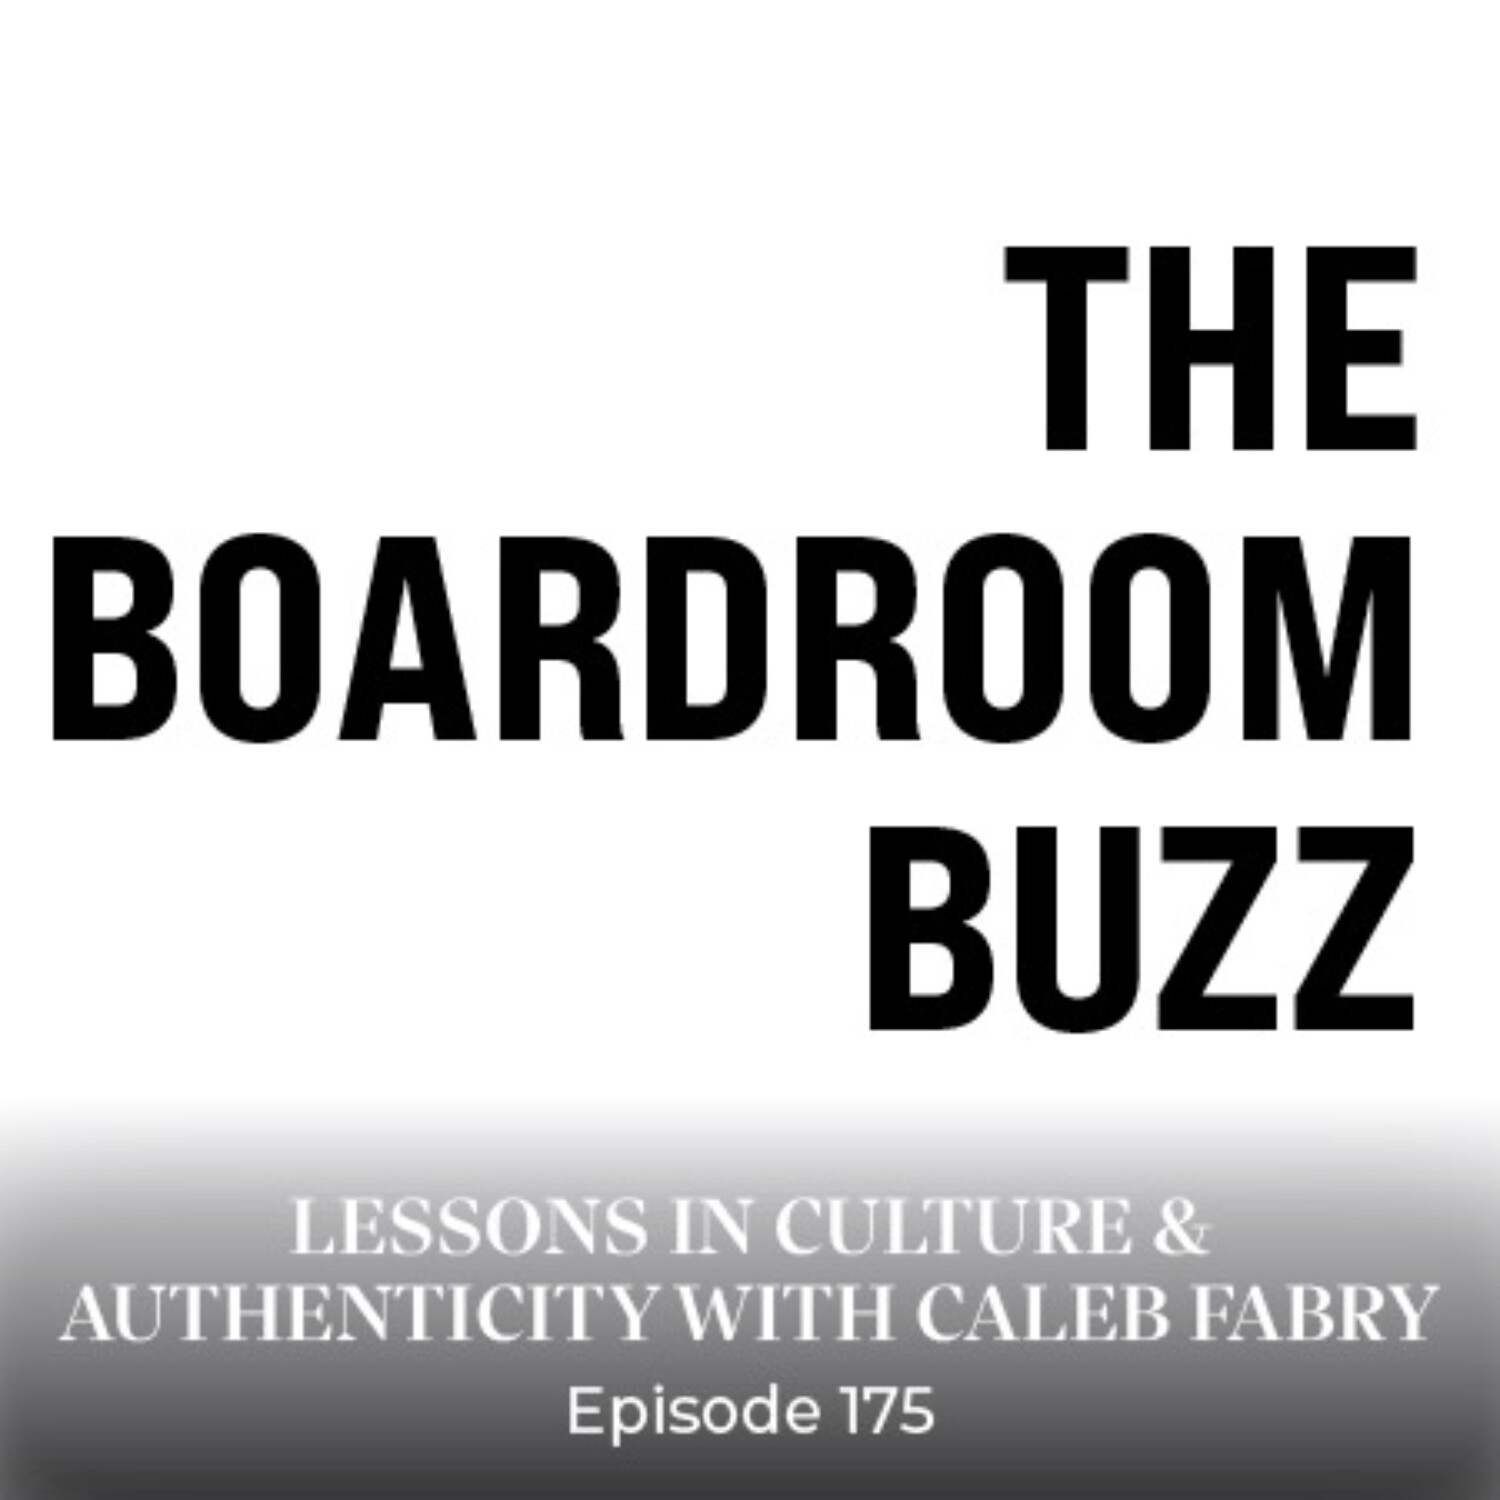 Episode 175 — Lessons in Culture & Authenticity with Caleb Fabry